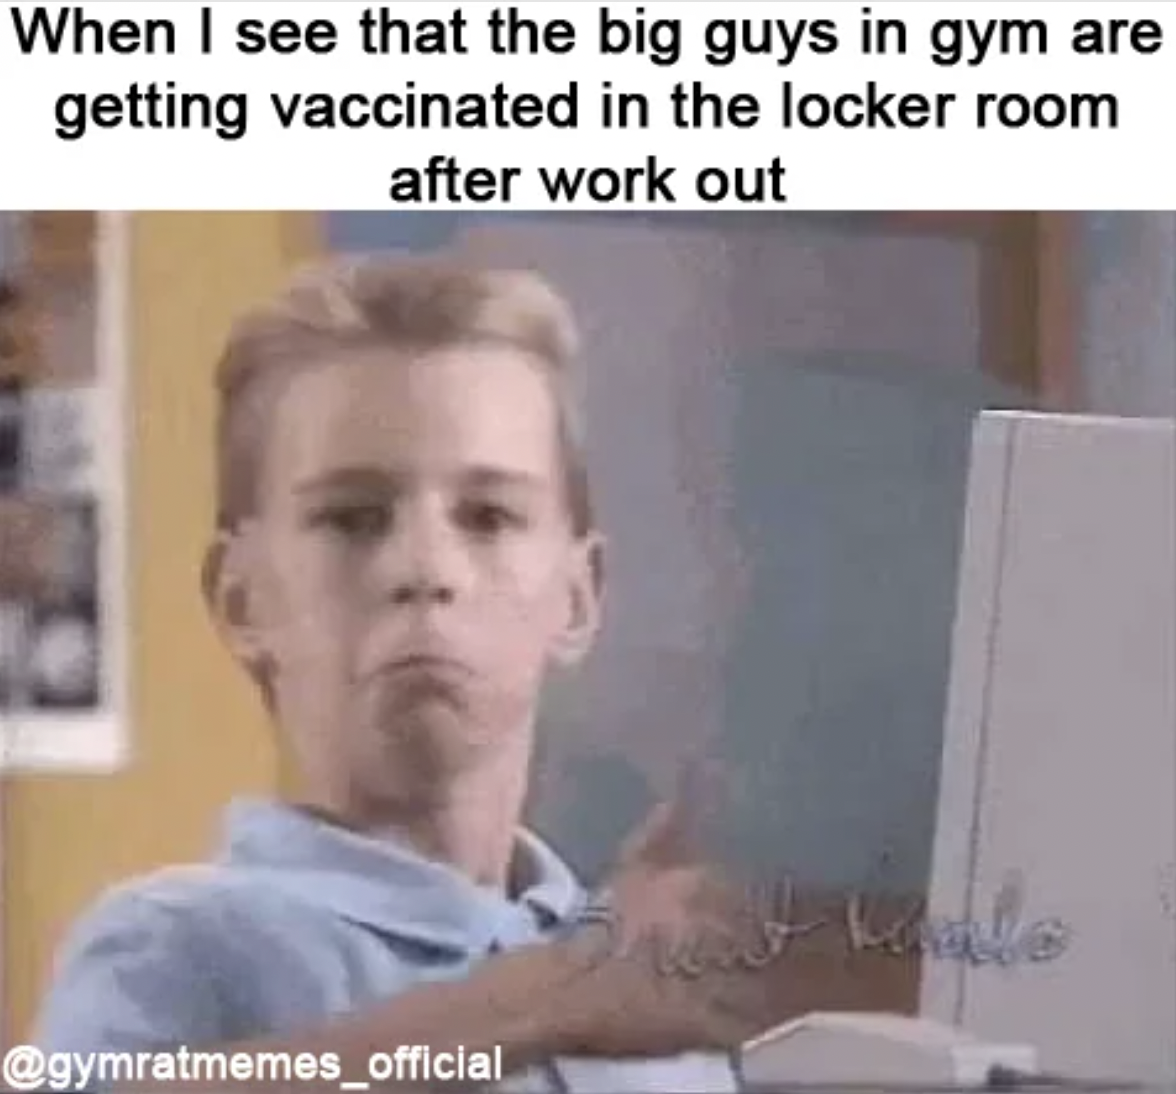 thumbs up kid meme - When I see that the big guys in gym are getting vaccinated in the locker room after work out met haale